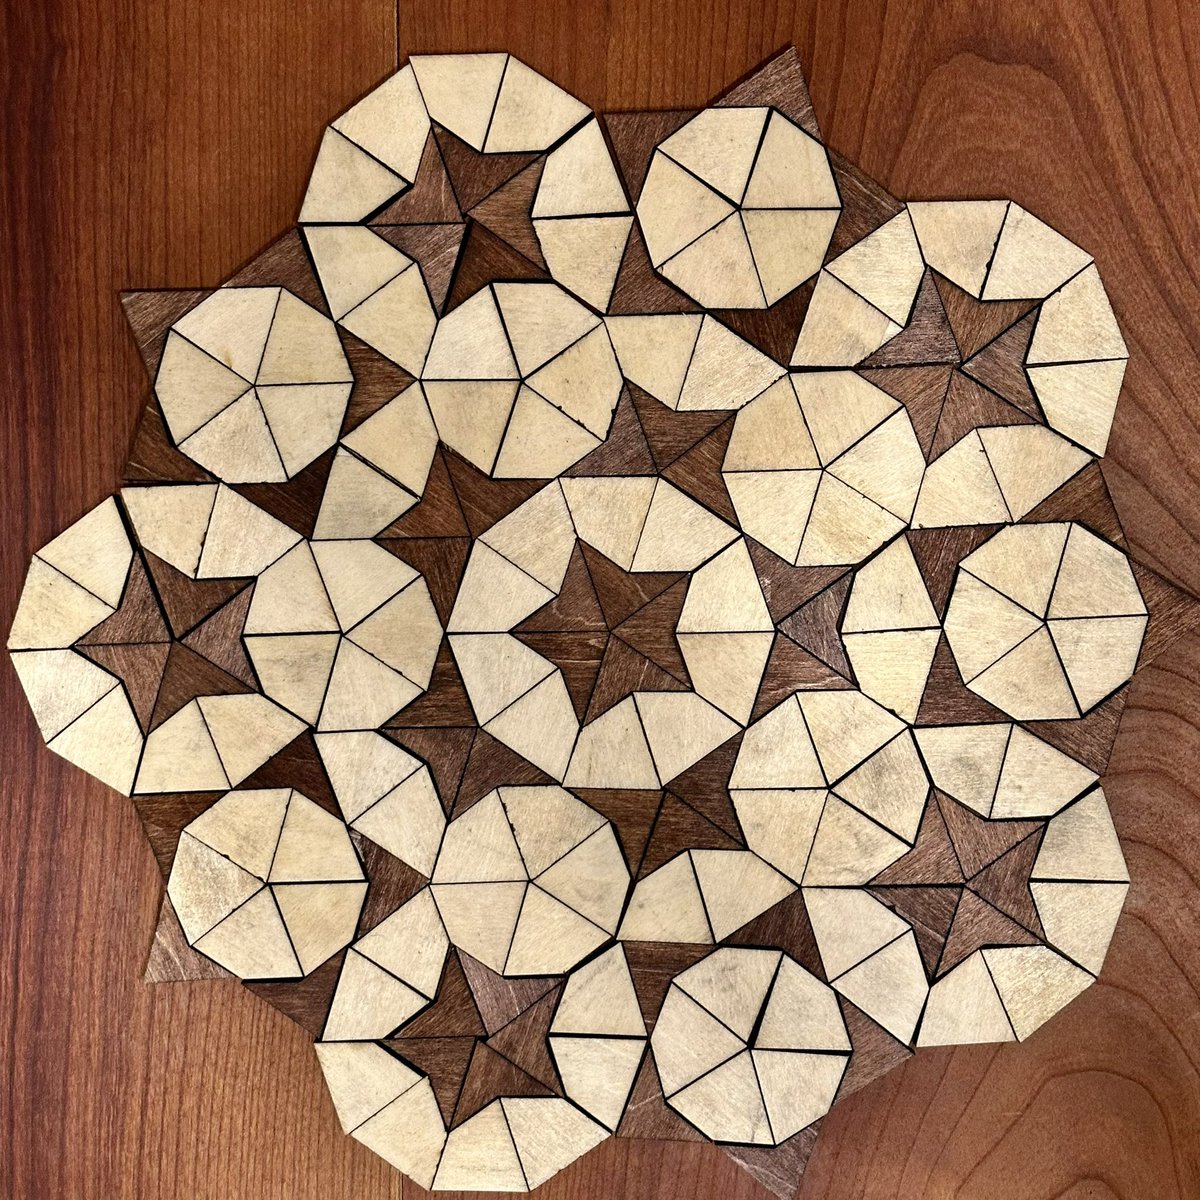 I made some wooden Penrose kites and darts.